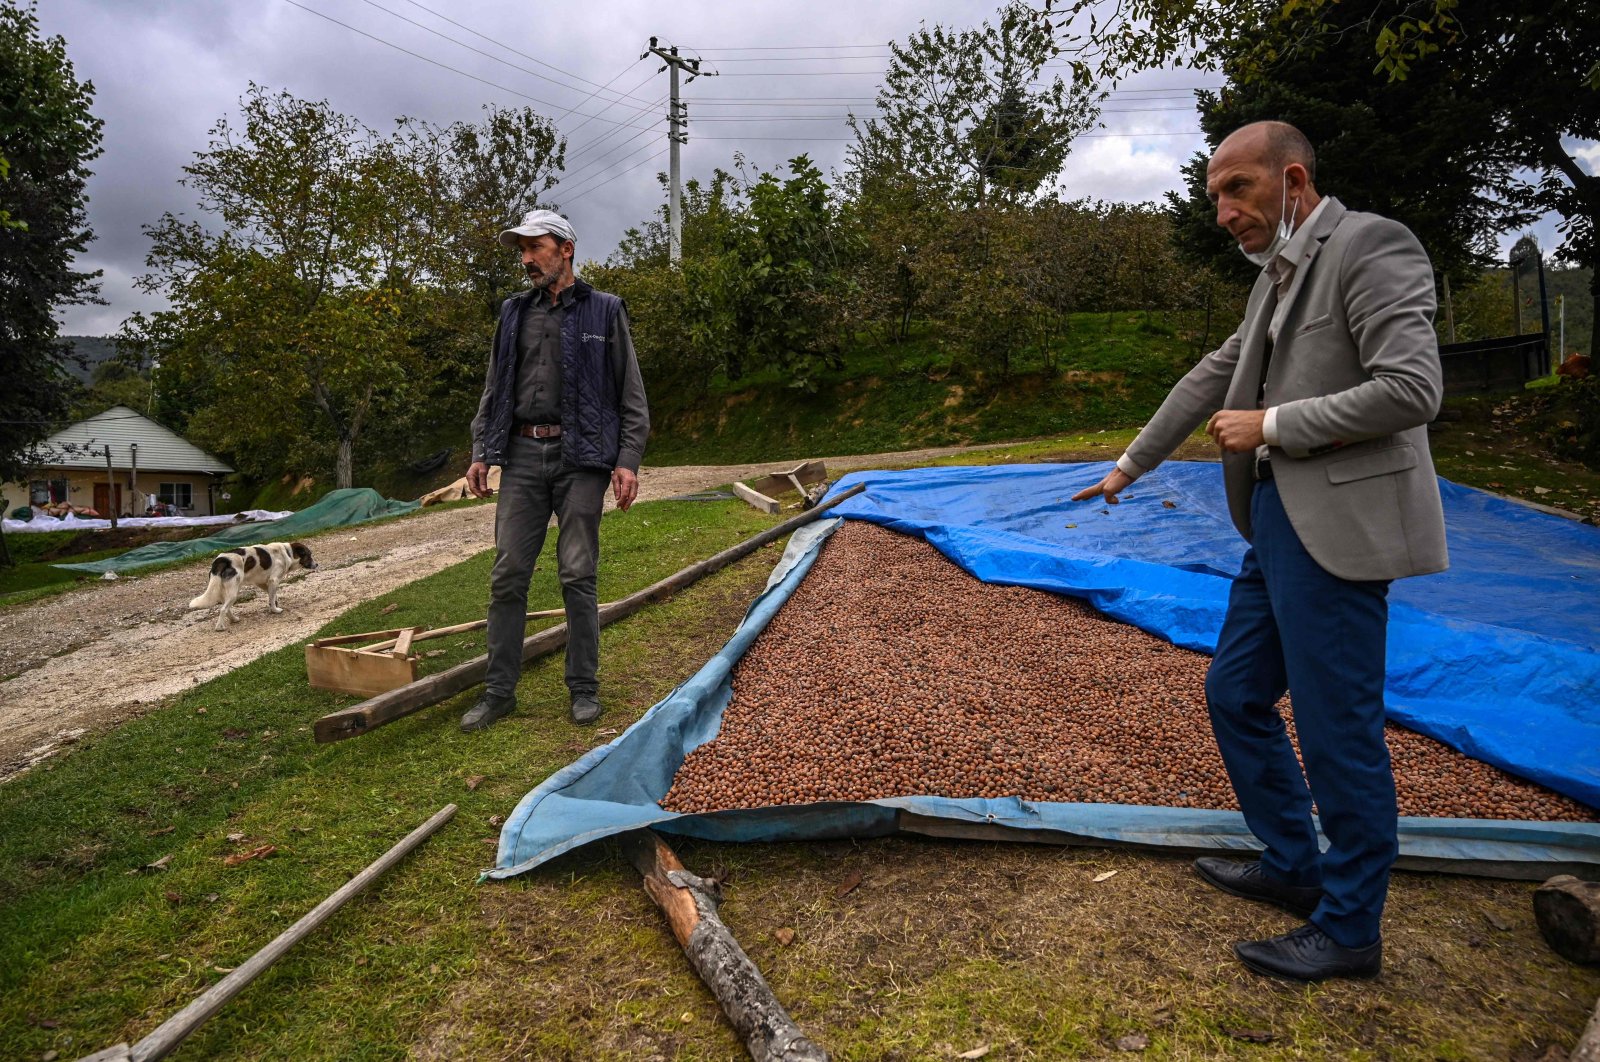 Hazelnuts producers put hazelnuts to dry on the ground after being washed at a nut orchard in the Akyazı district, in Sakarya, Oct. 5, 2021. (AFP Photo)